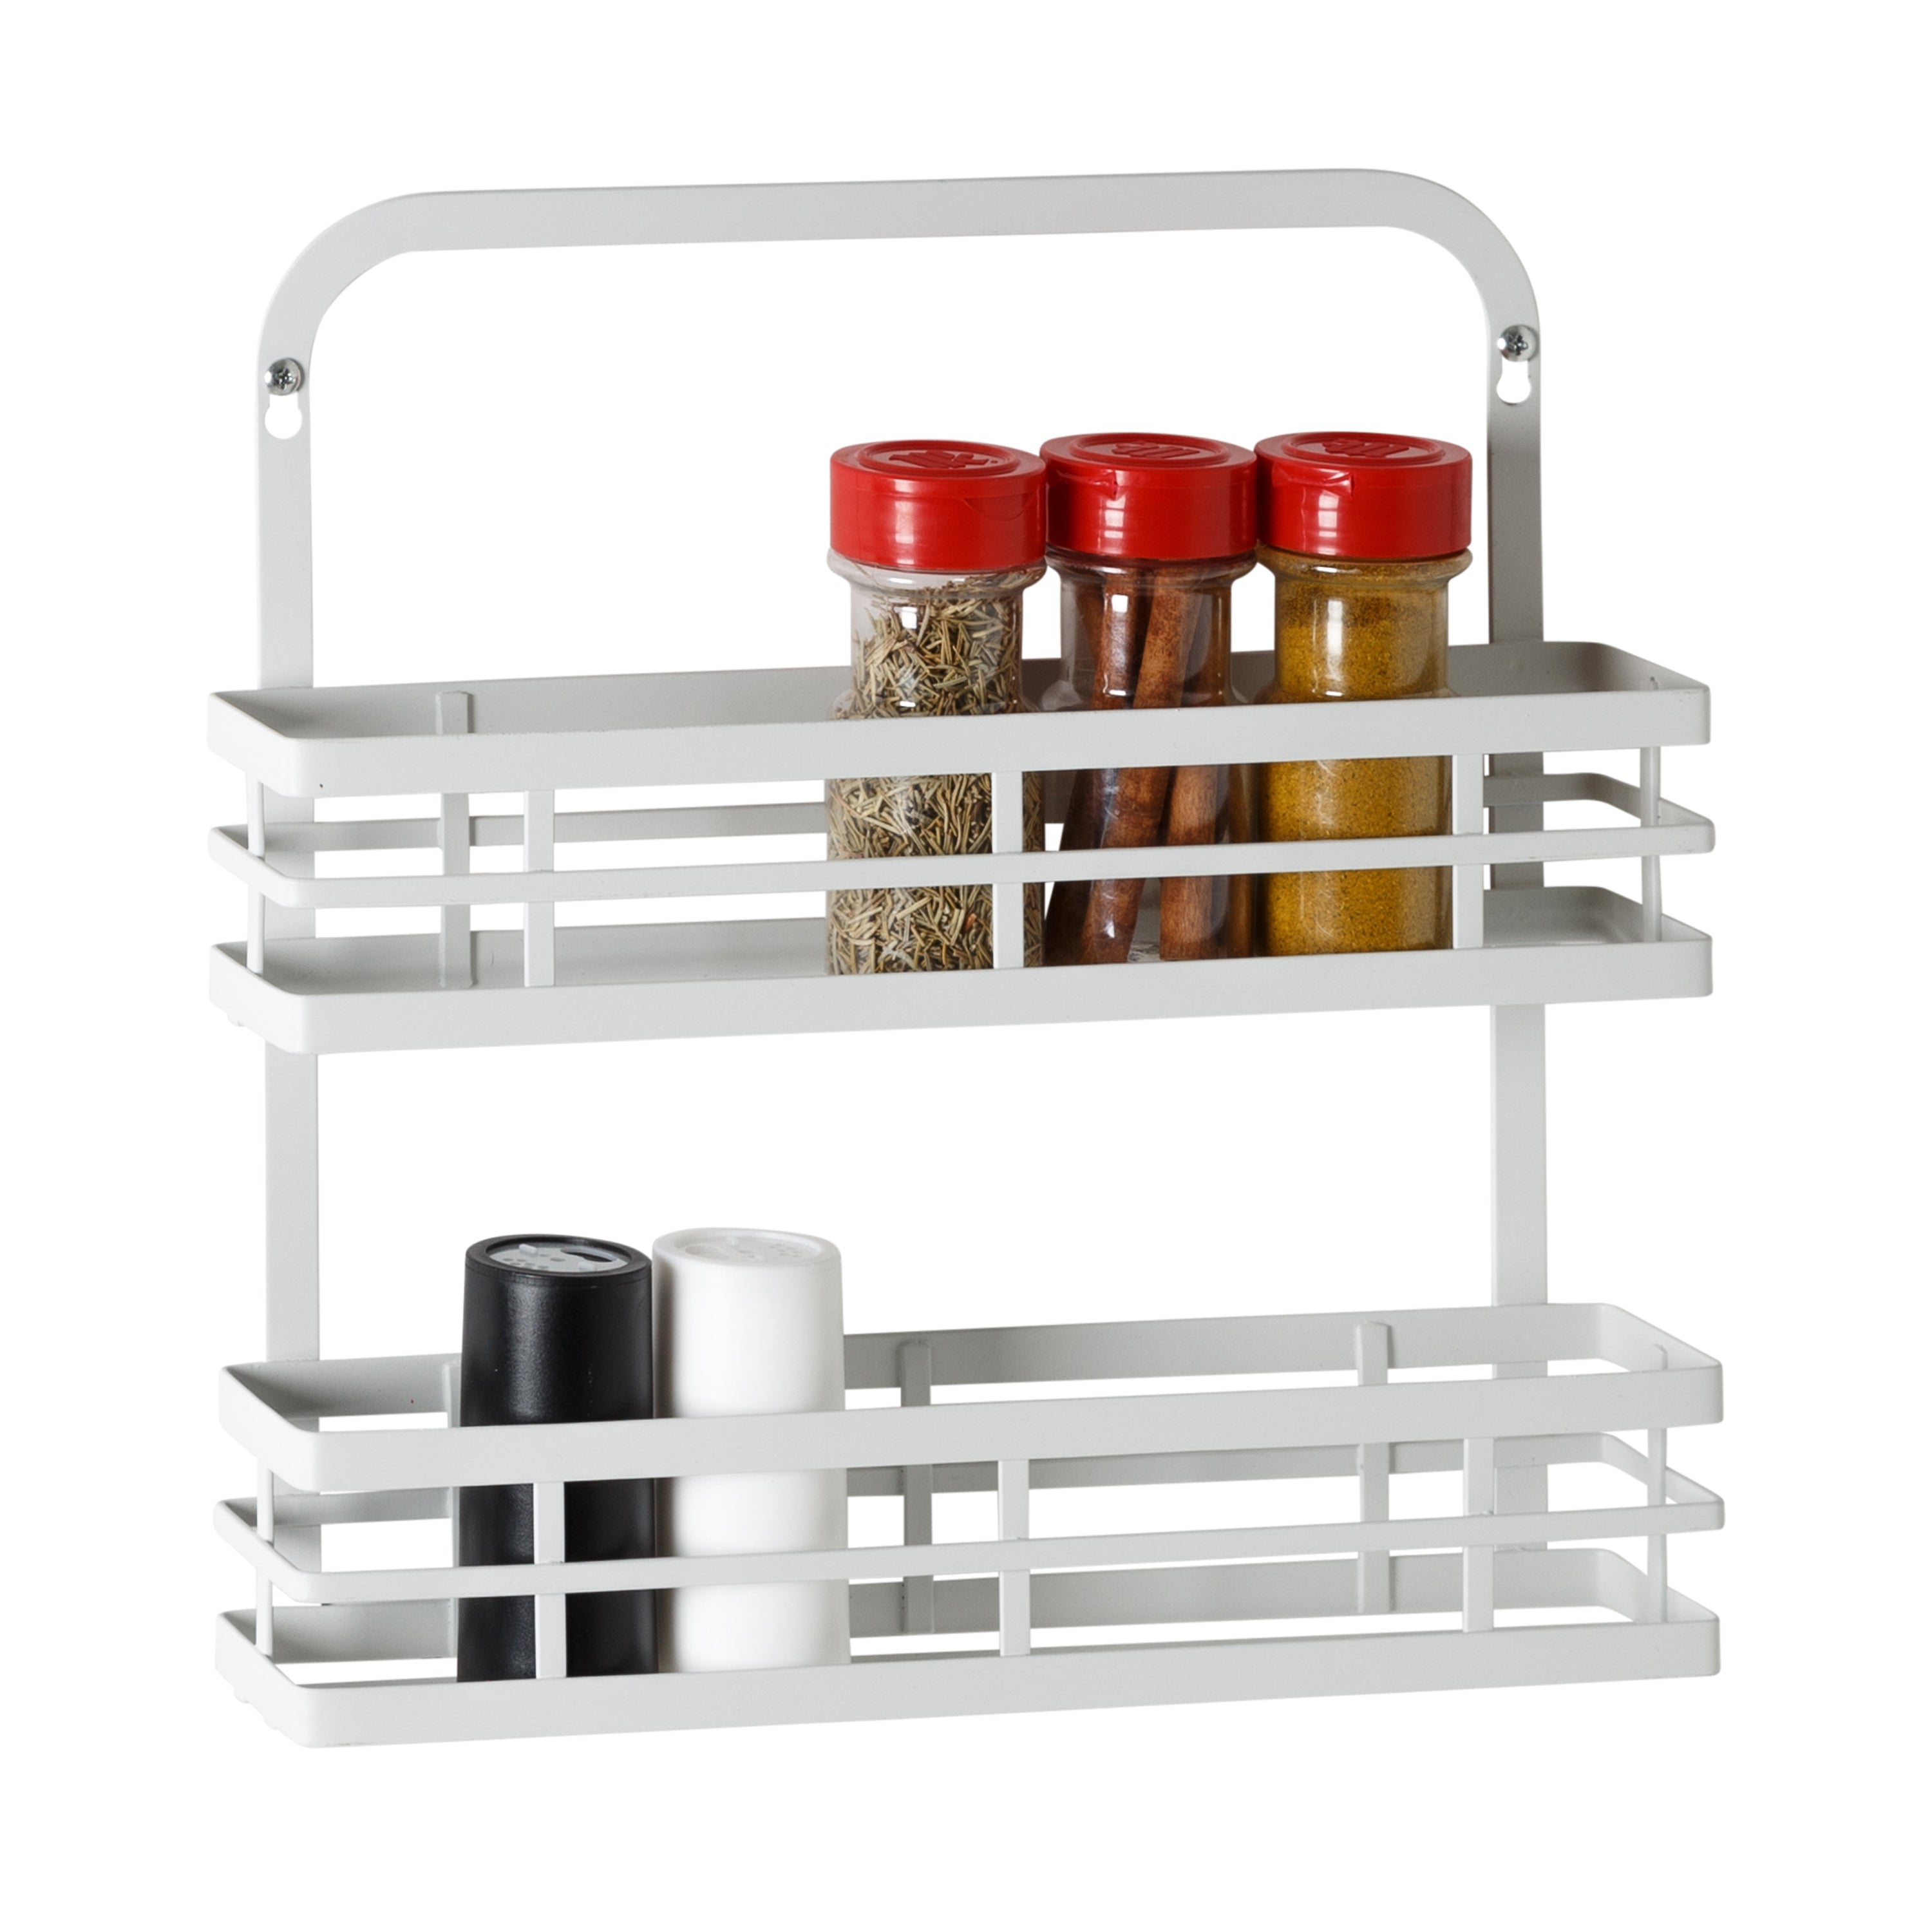 Honey Can Do Paper Towel Holder with Steel Spice Rack - Gray